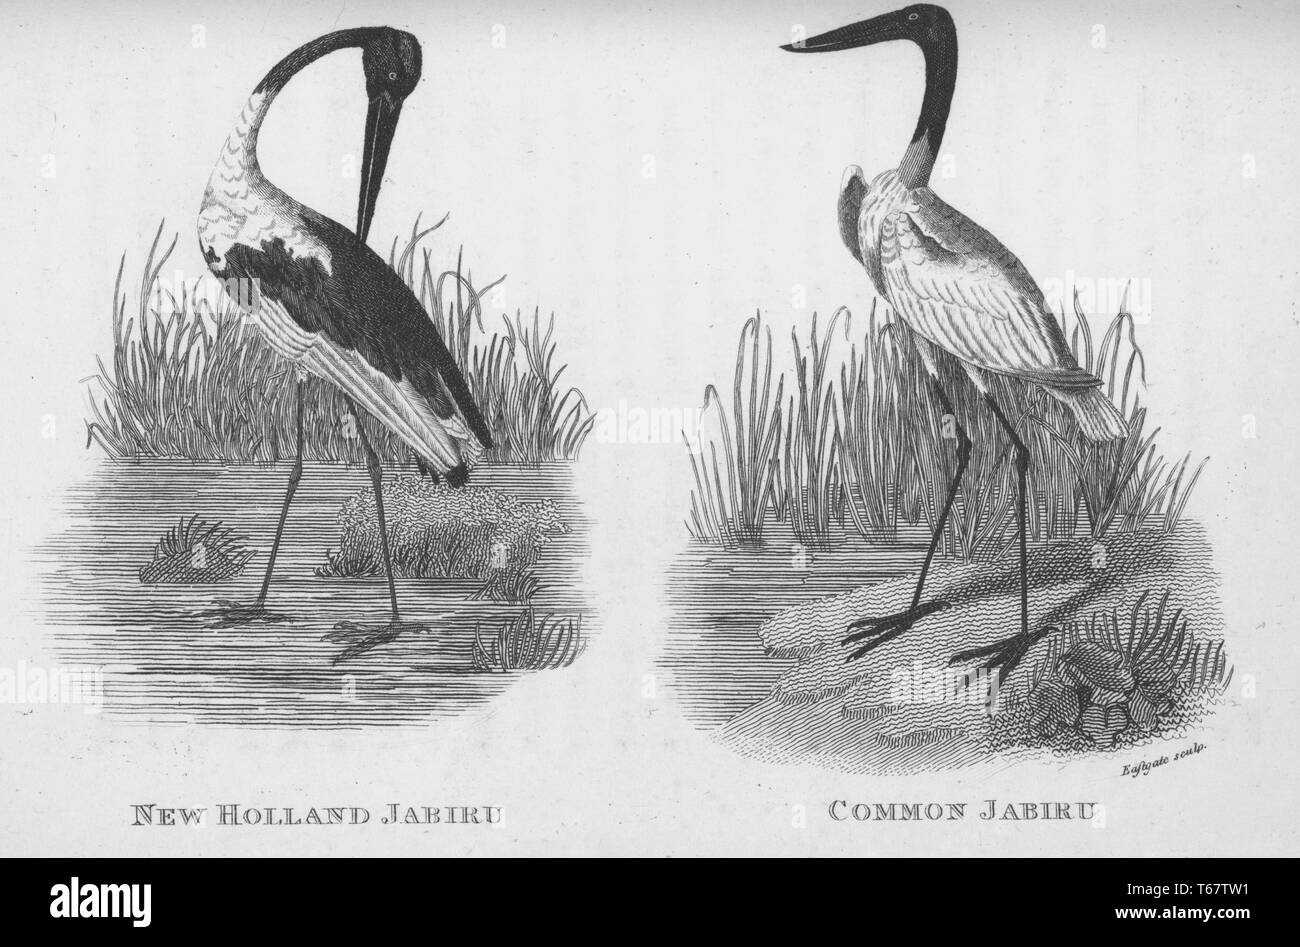 Two engravings of birds from the book 'Zoological Lectures Delivered at the Royal Institution' by George Shaw, Shaw was a British botanist and zoologist who published several books, the bird on the left is a New Holland jabiru which is known as a black-necked stork today, the bird on the right is a common jabiru which is found from Mexico through South America and is the tallest flying bird in the region, both birds are part of the family Ciconiidae which are storks, 1809. From the New York Public Library. Stock Photo